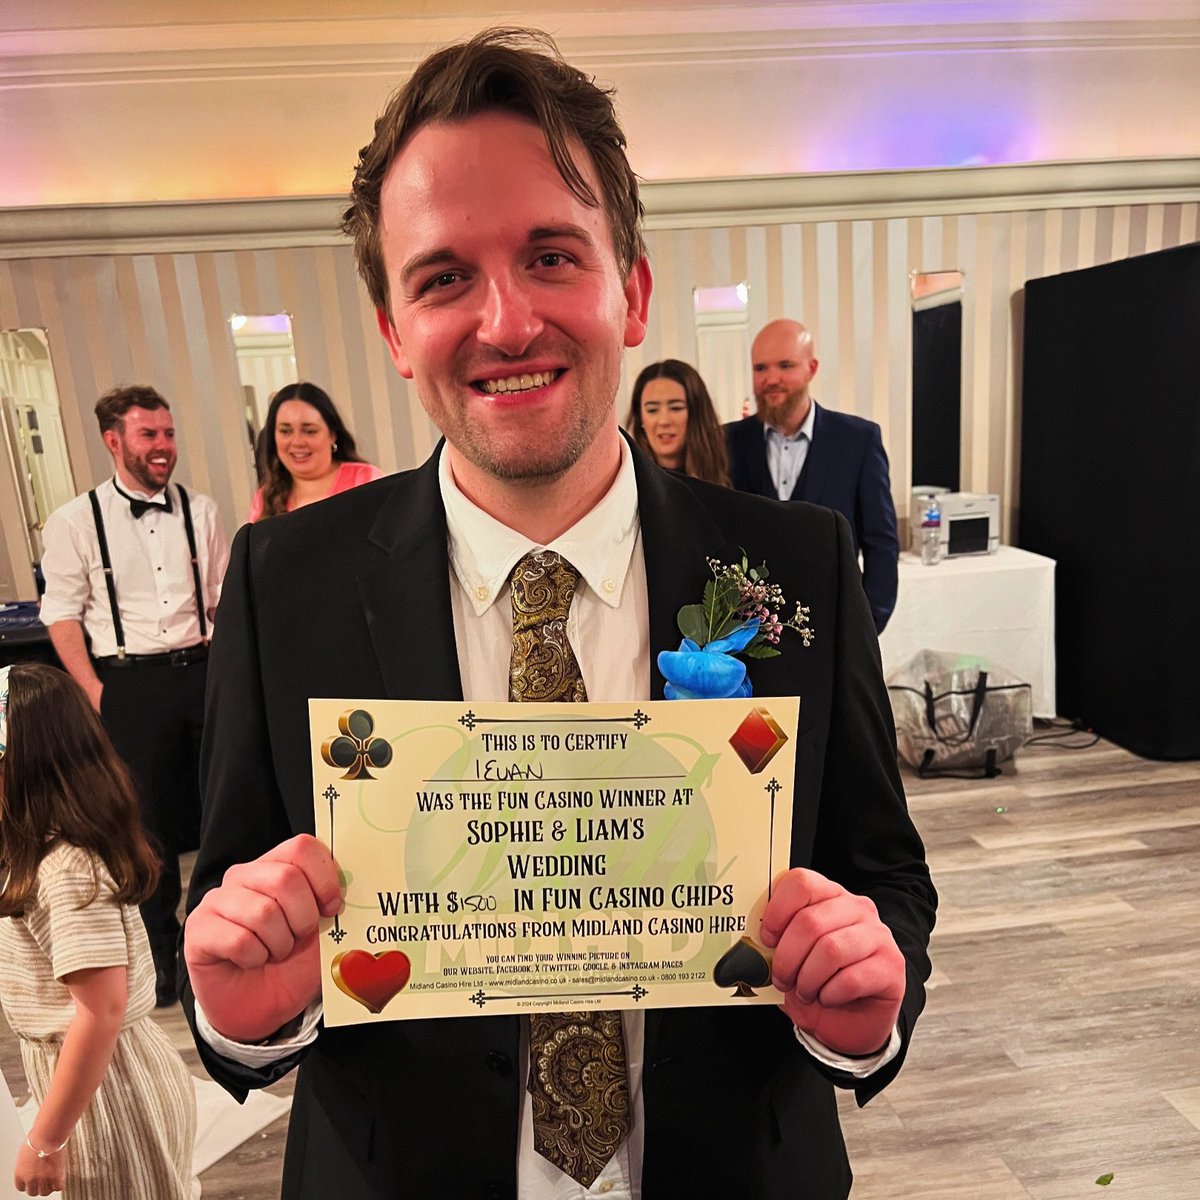 🎉 Huge congrats to Ieuan for hitting the jackpot at Sophie & Liam’s Wedding at @Warwick_House in Southam! 🎰 Winning 1500 fun casino chips definitely made the night unforgettable! 🌟 #Entertainment #Events #Weddings #Parties #FunCasinos #Southam #Warwickshire #midlands 🎊🥳🃏